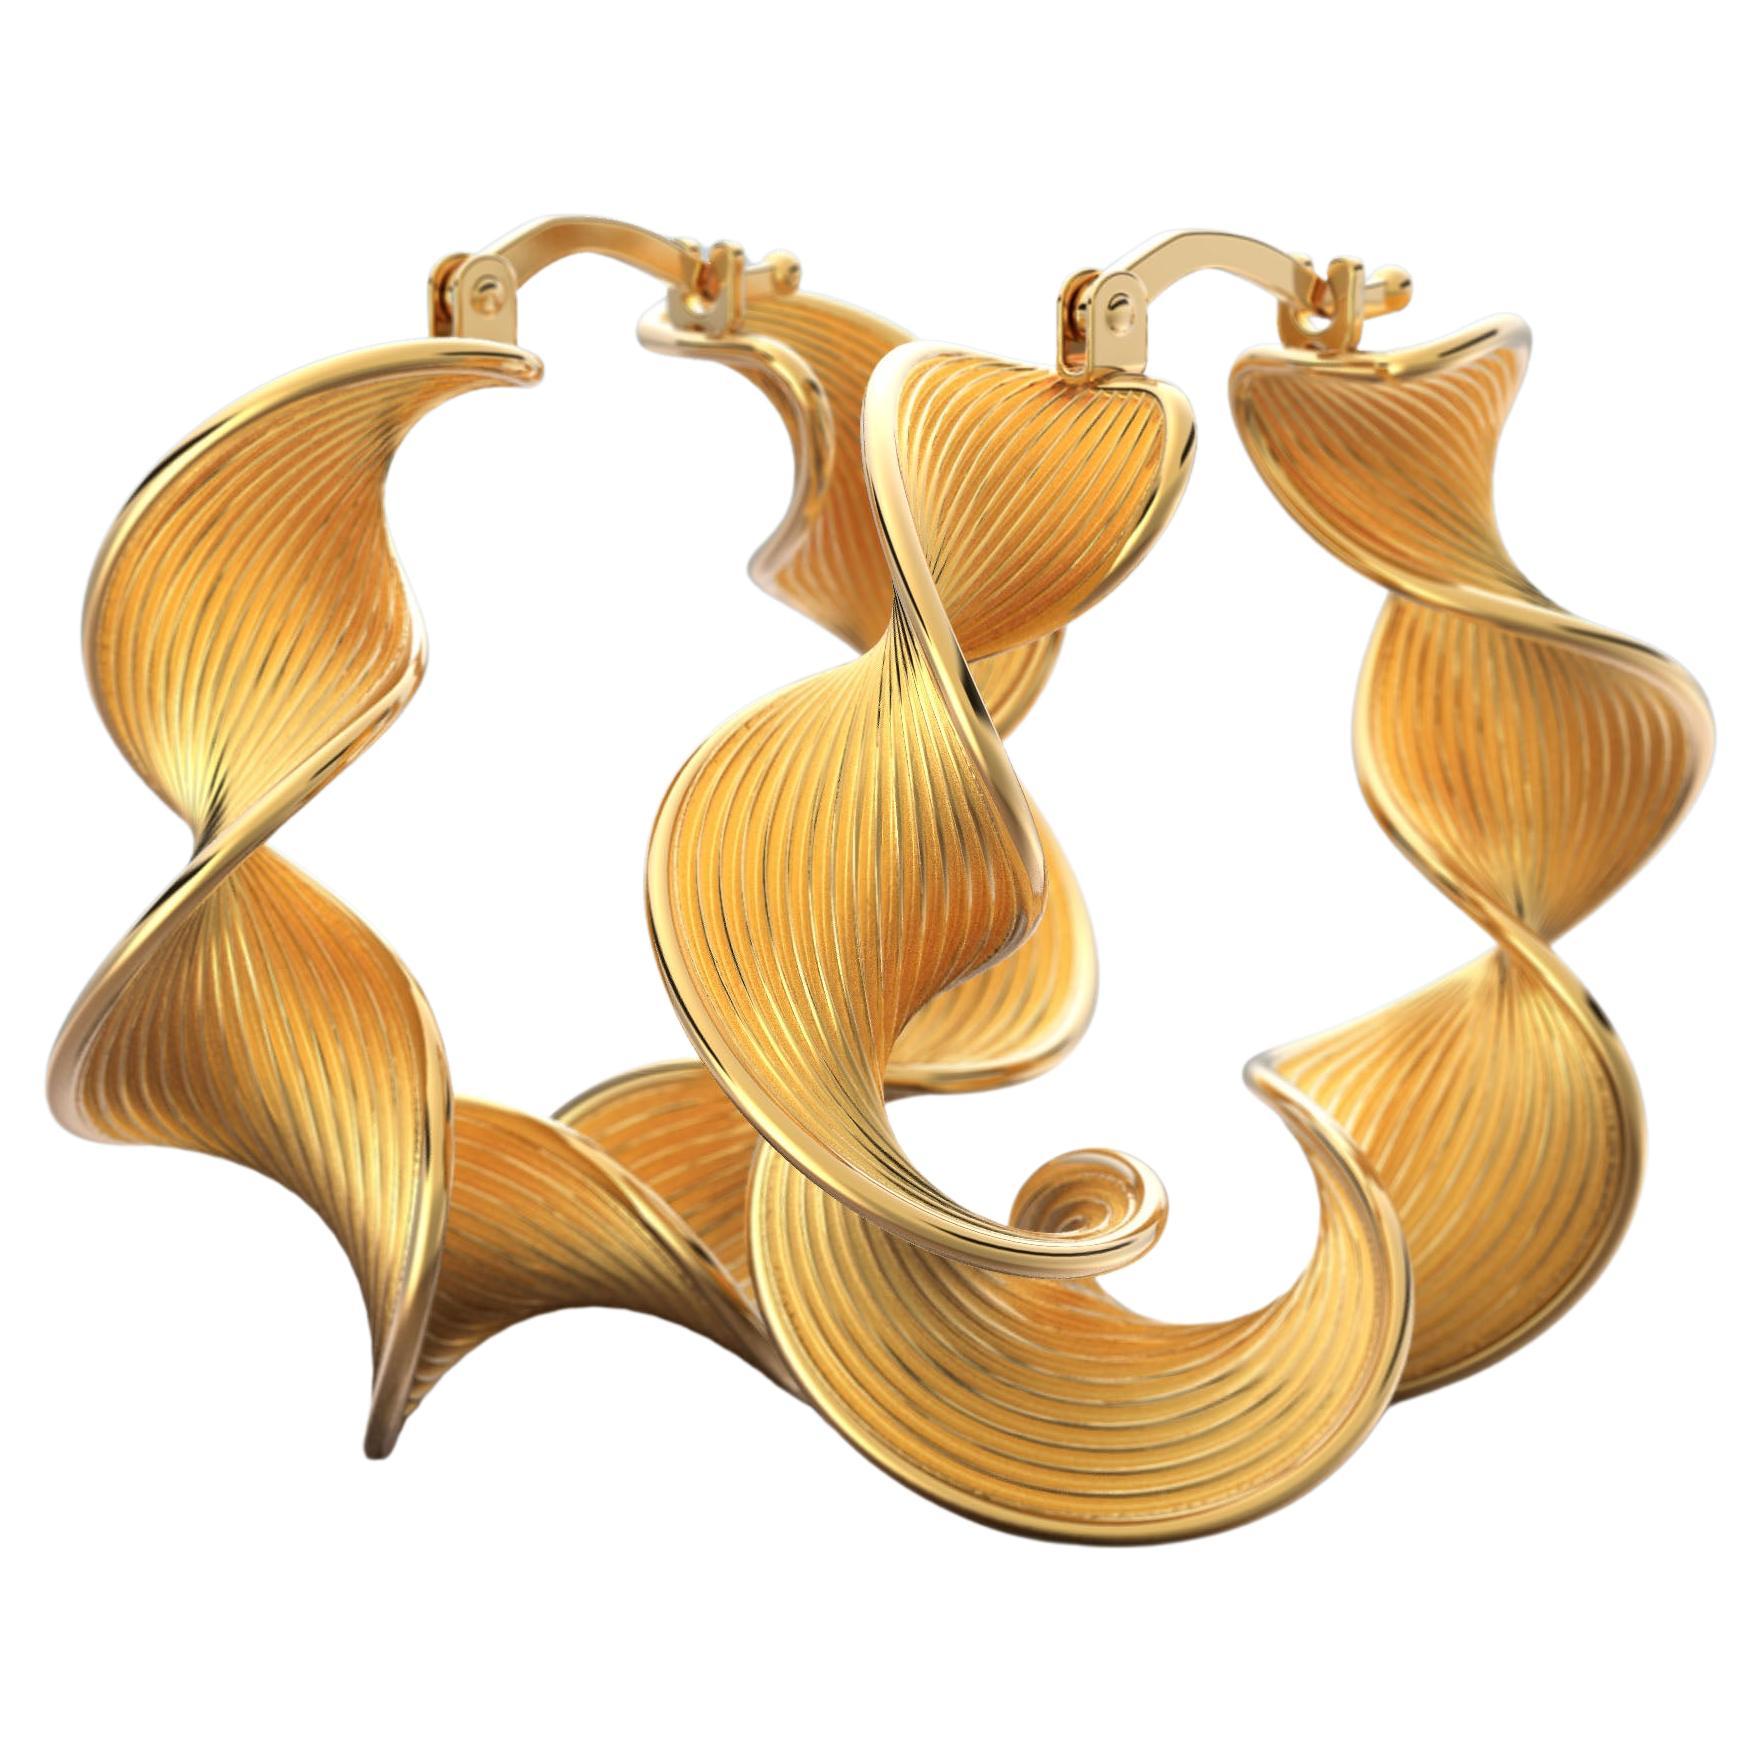 Oltremare Gioielli  14k Twisted Gold Hoop Earrings Designed and Crafted in Italy